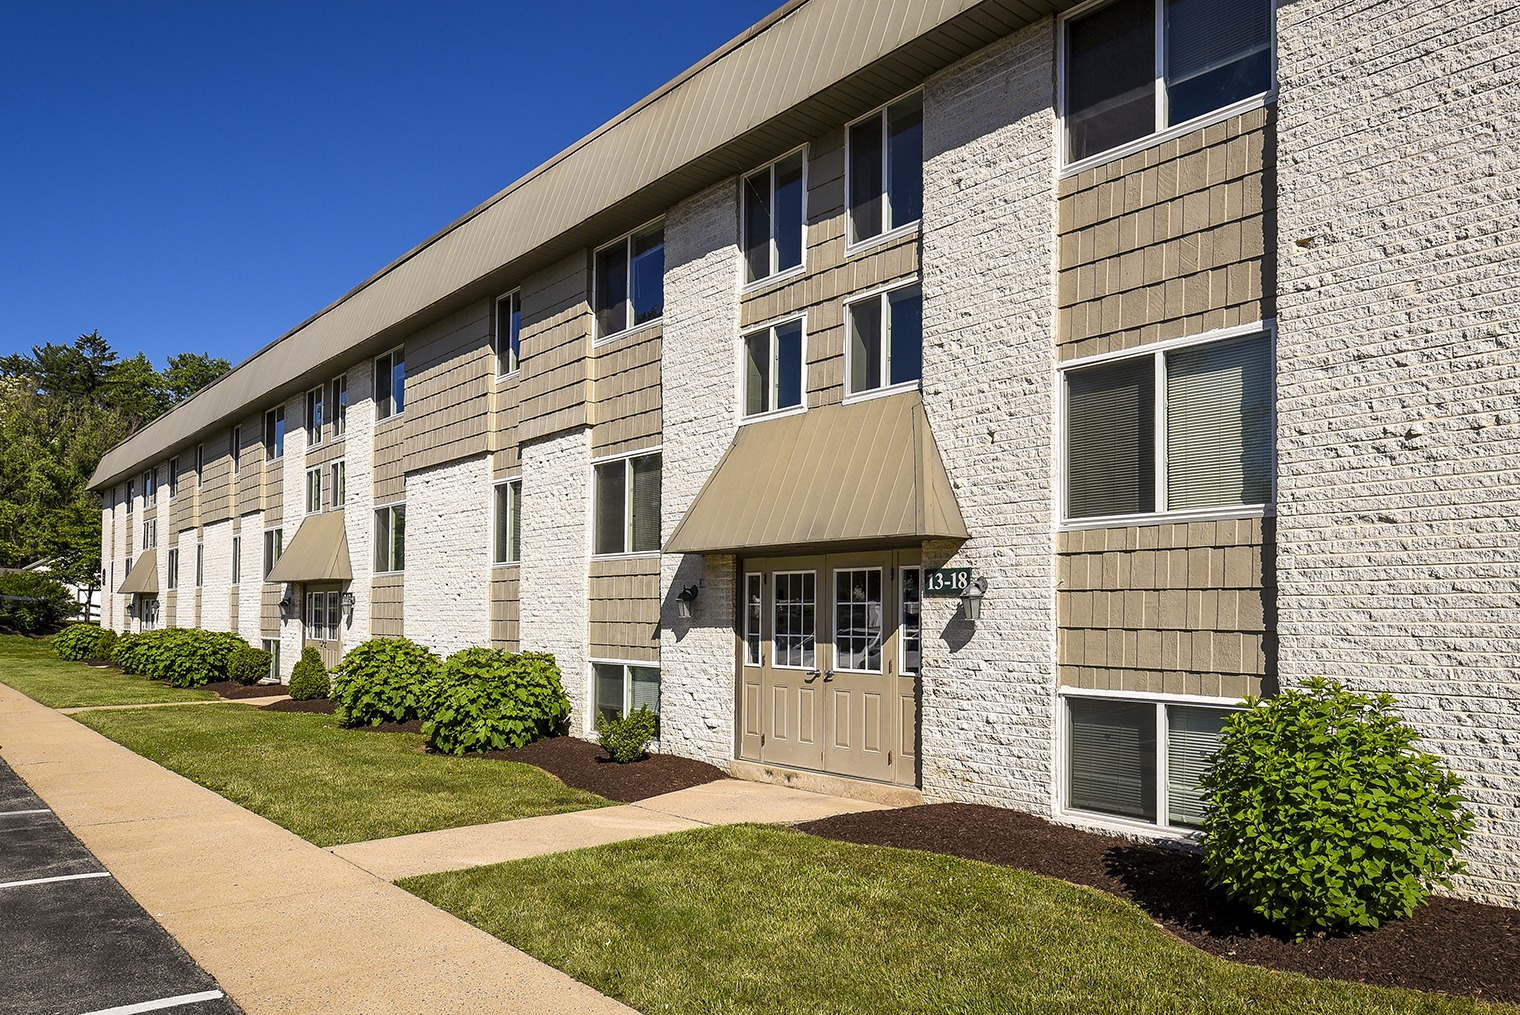 Exterior view of Park Court Womelsdorf apartments with landscaping and sidewalk in front